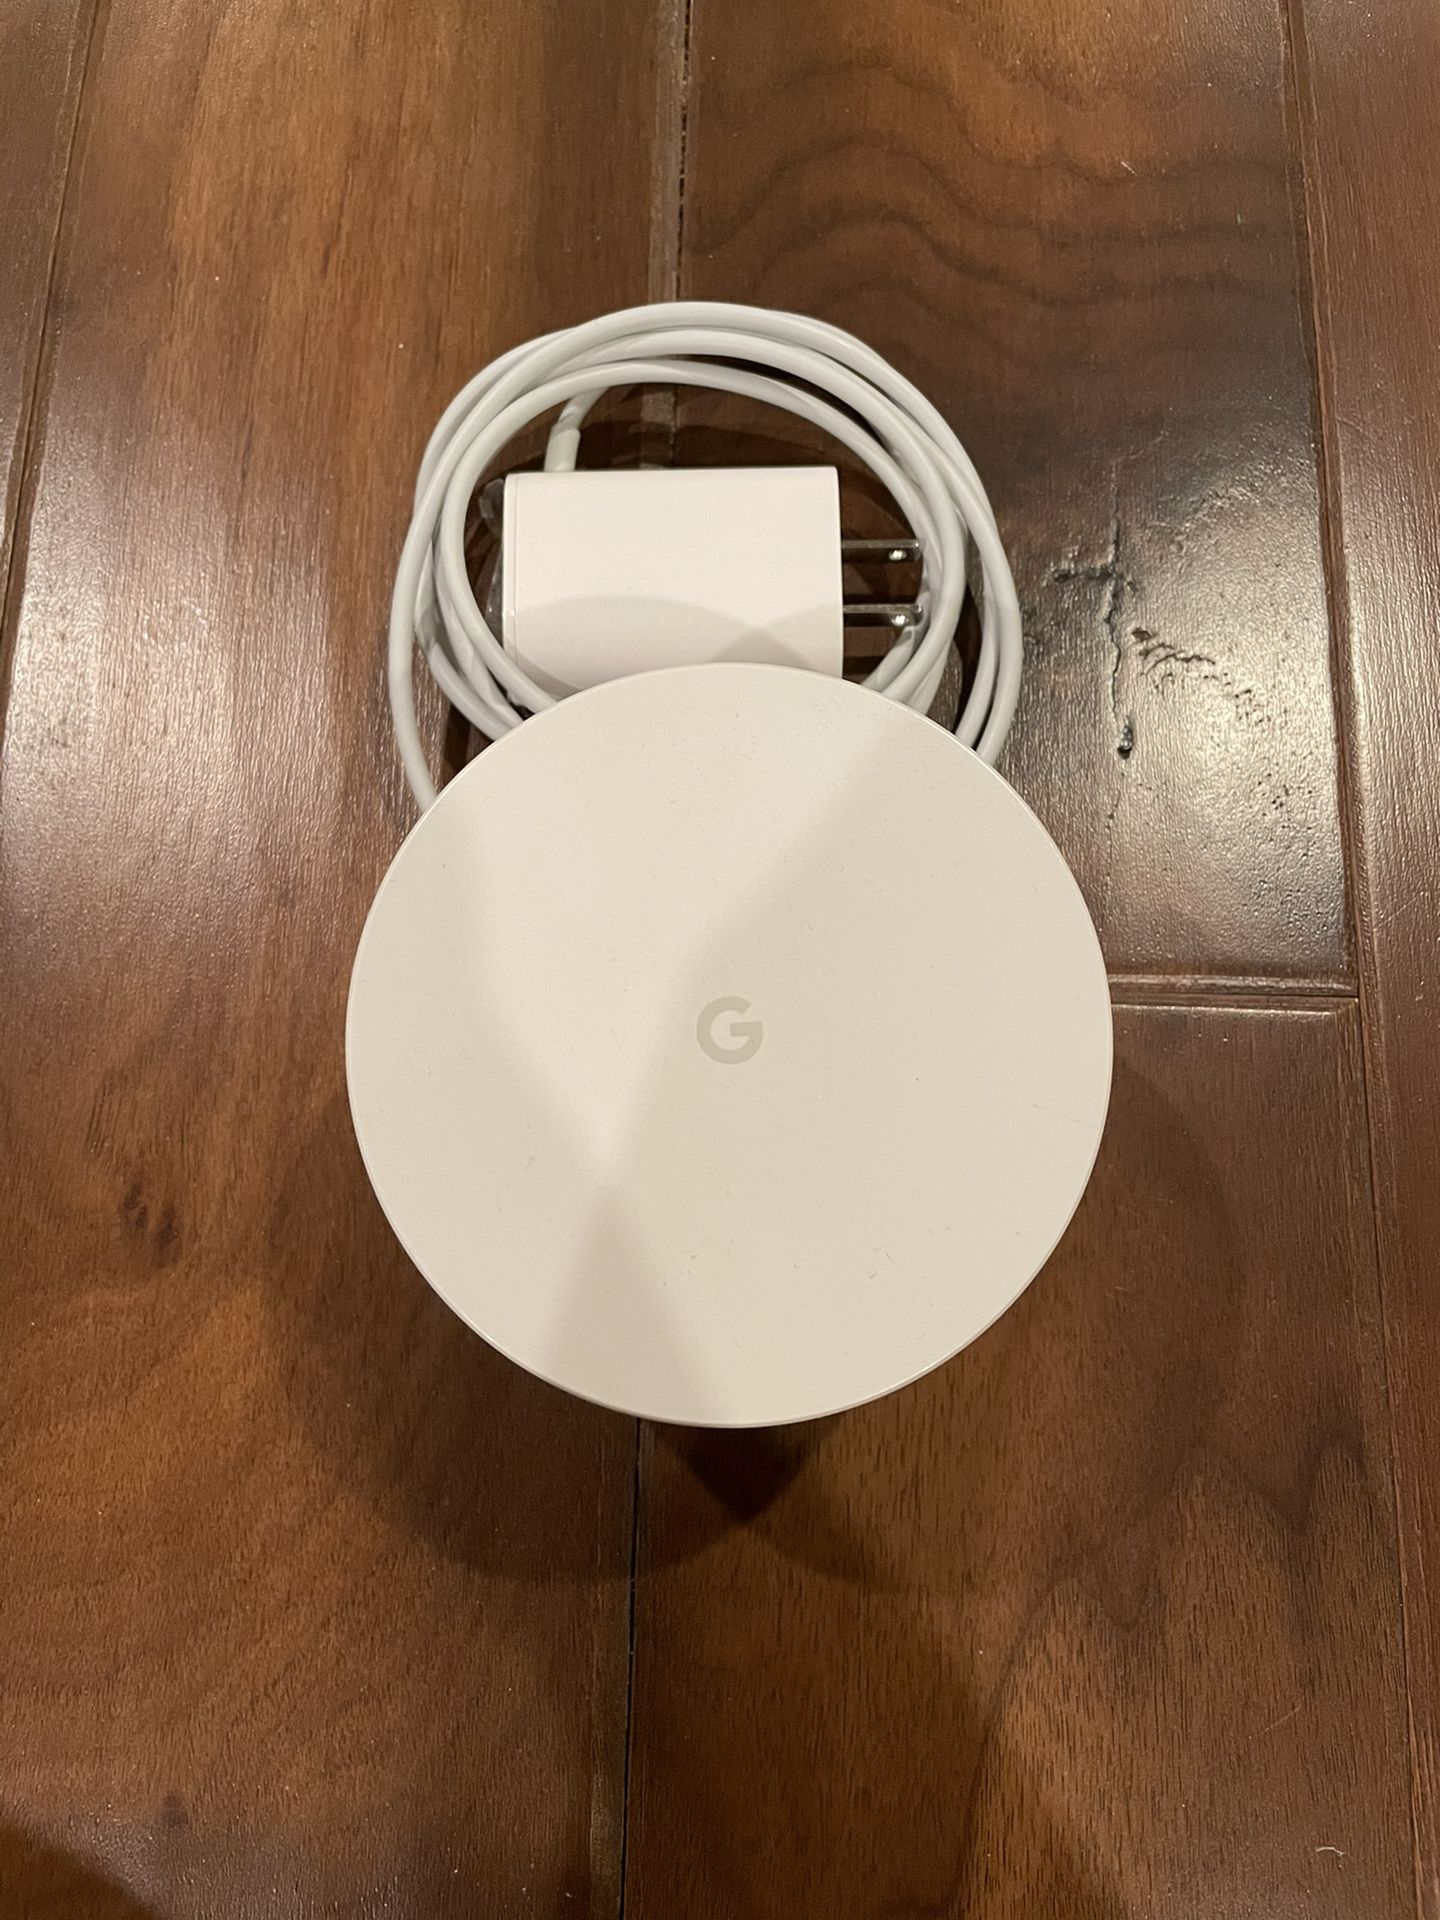 Google WiFi Router/Access Point